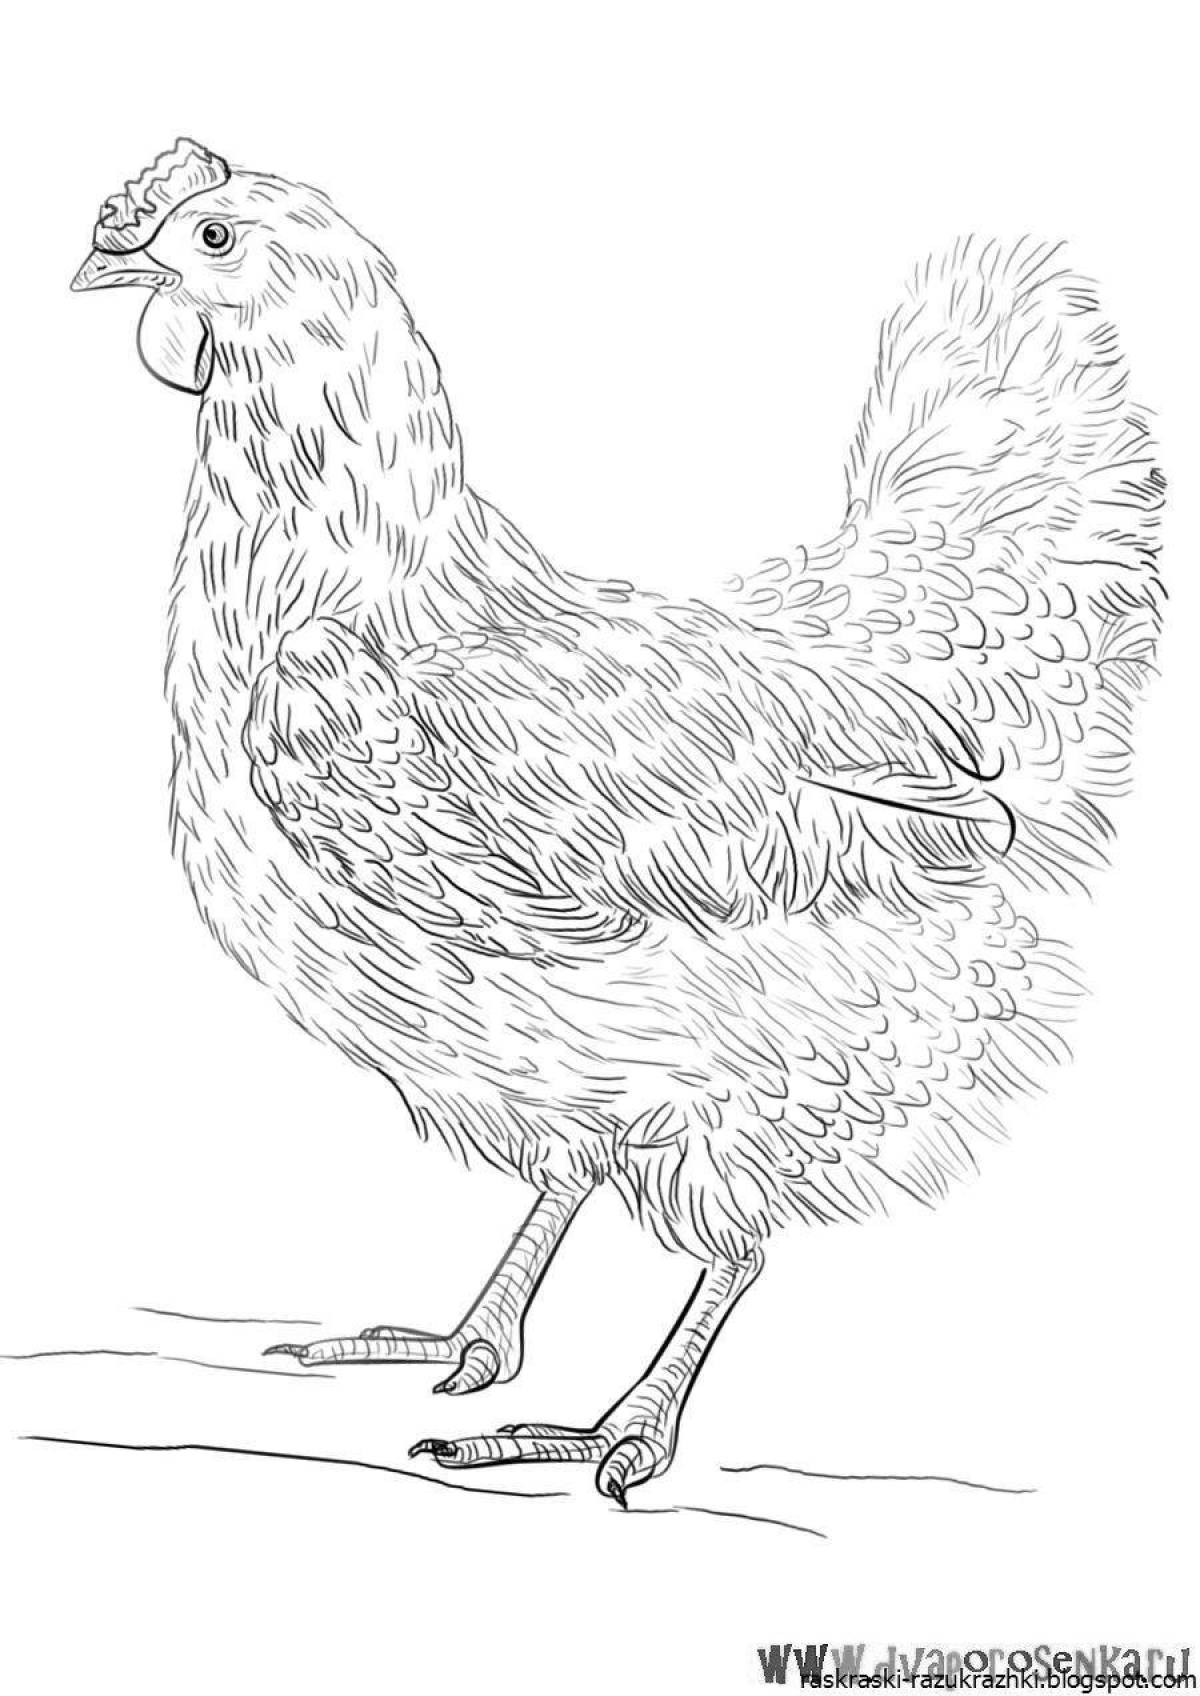 Gourmet black chicken coloring page